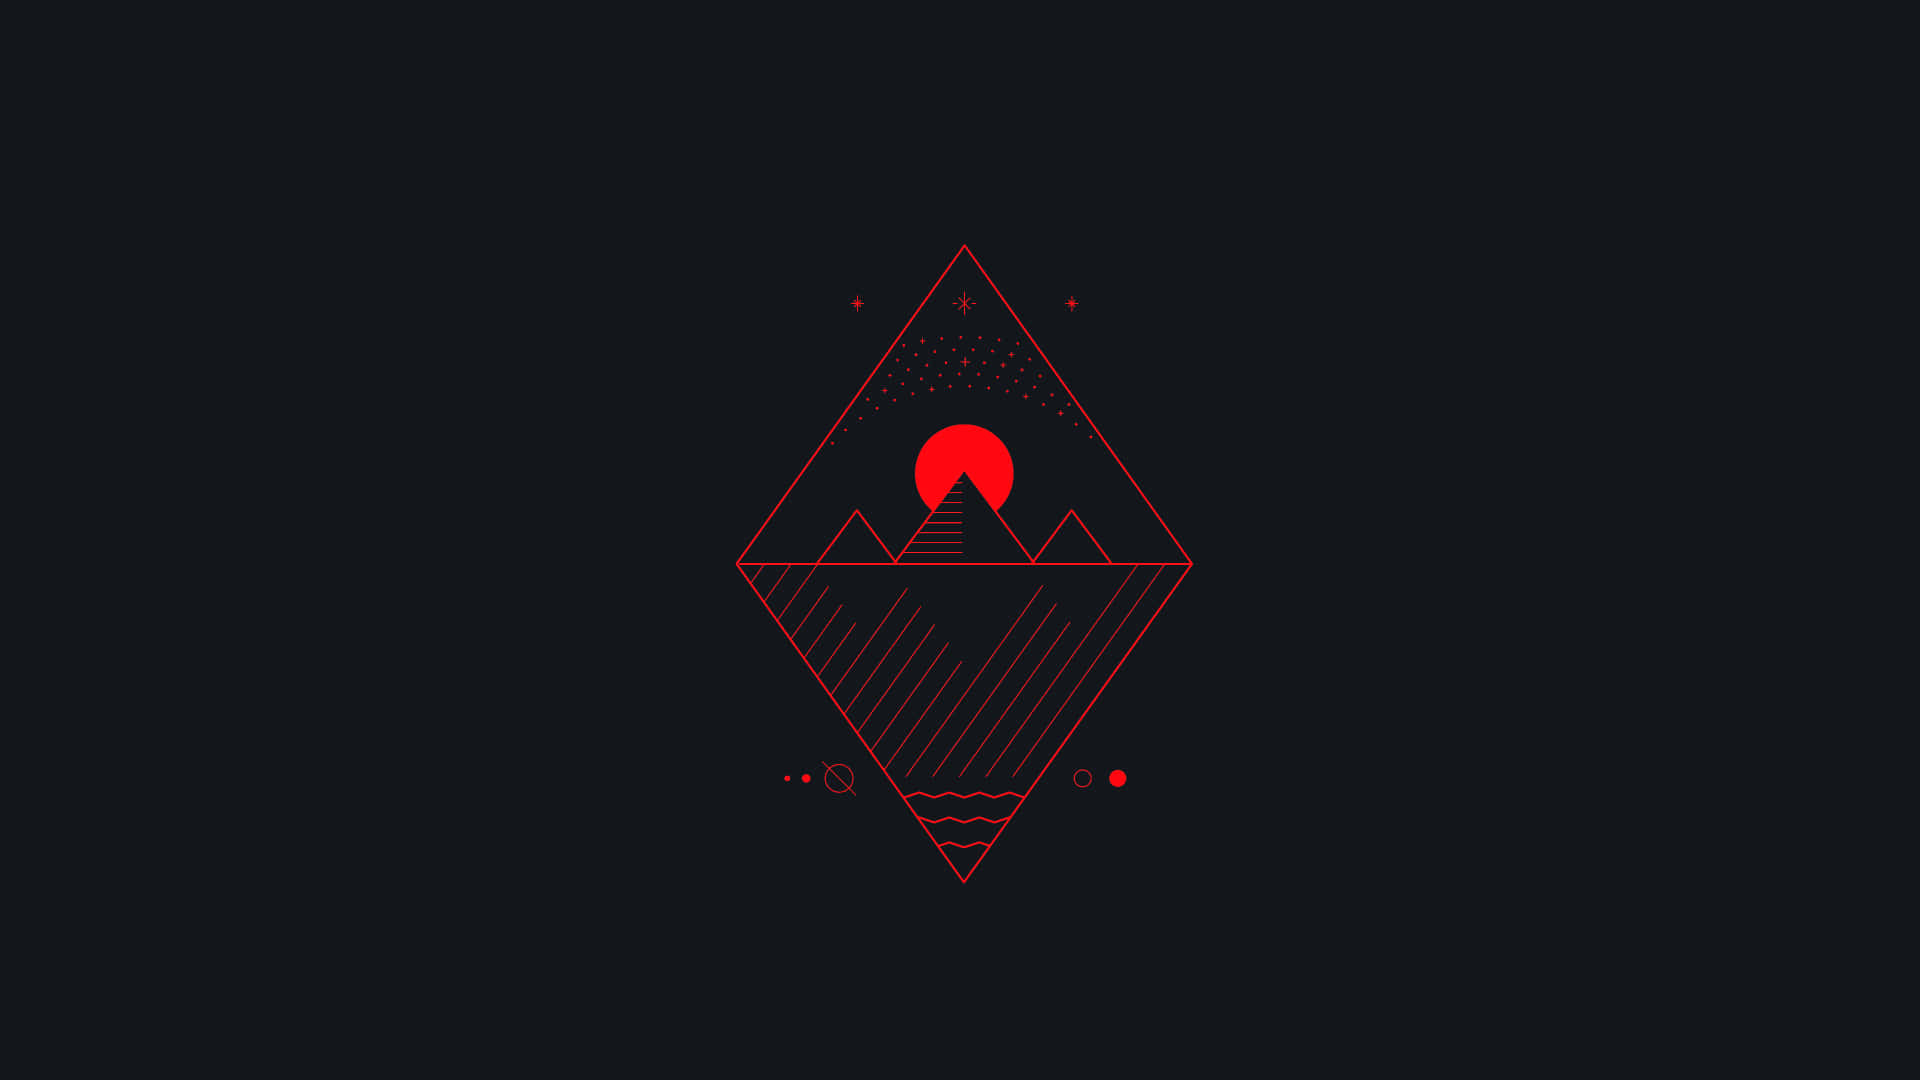 Download A Red Triangle With A Mountain In The Middle | Wallpapers.com